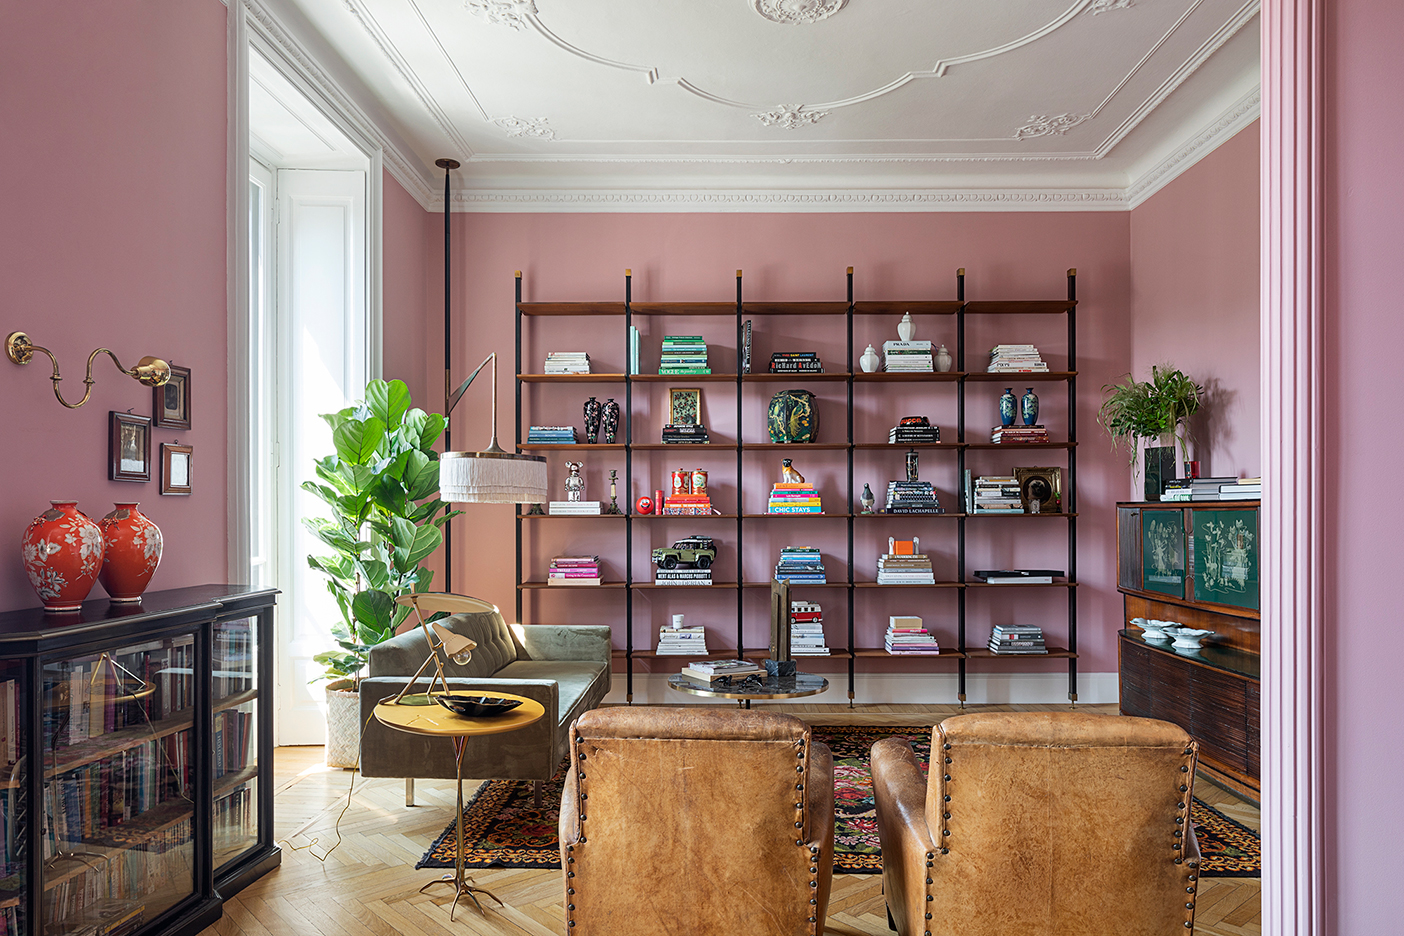 Living room bookshelves with pink walls